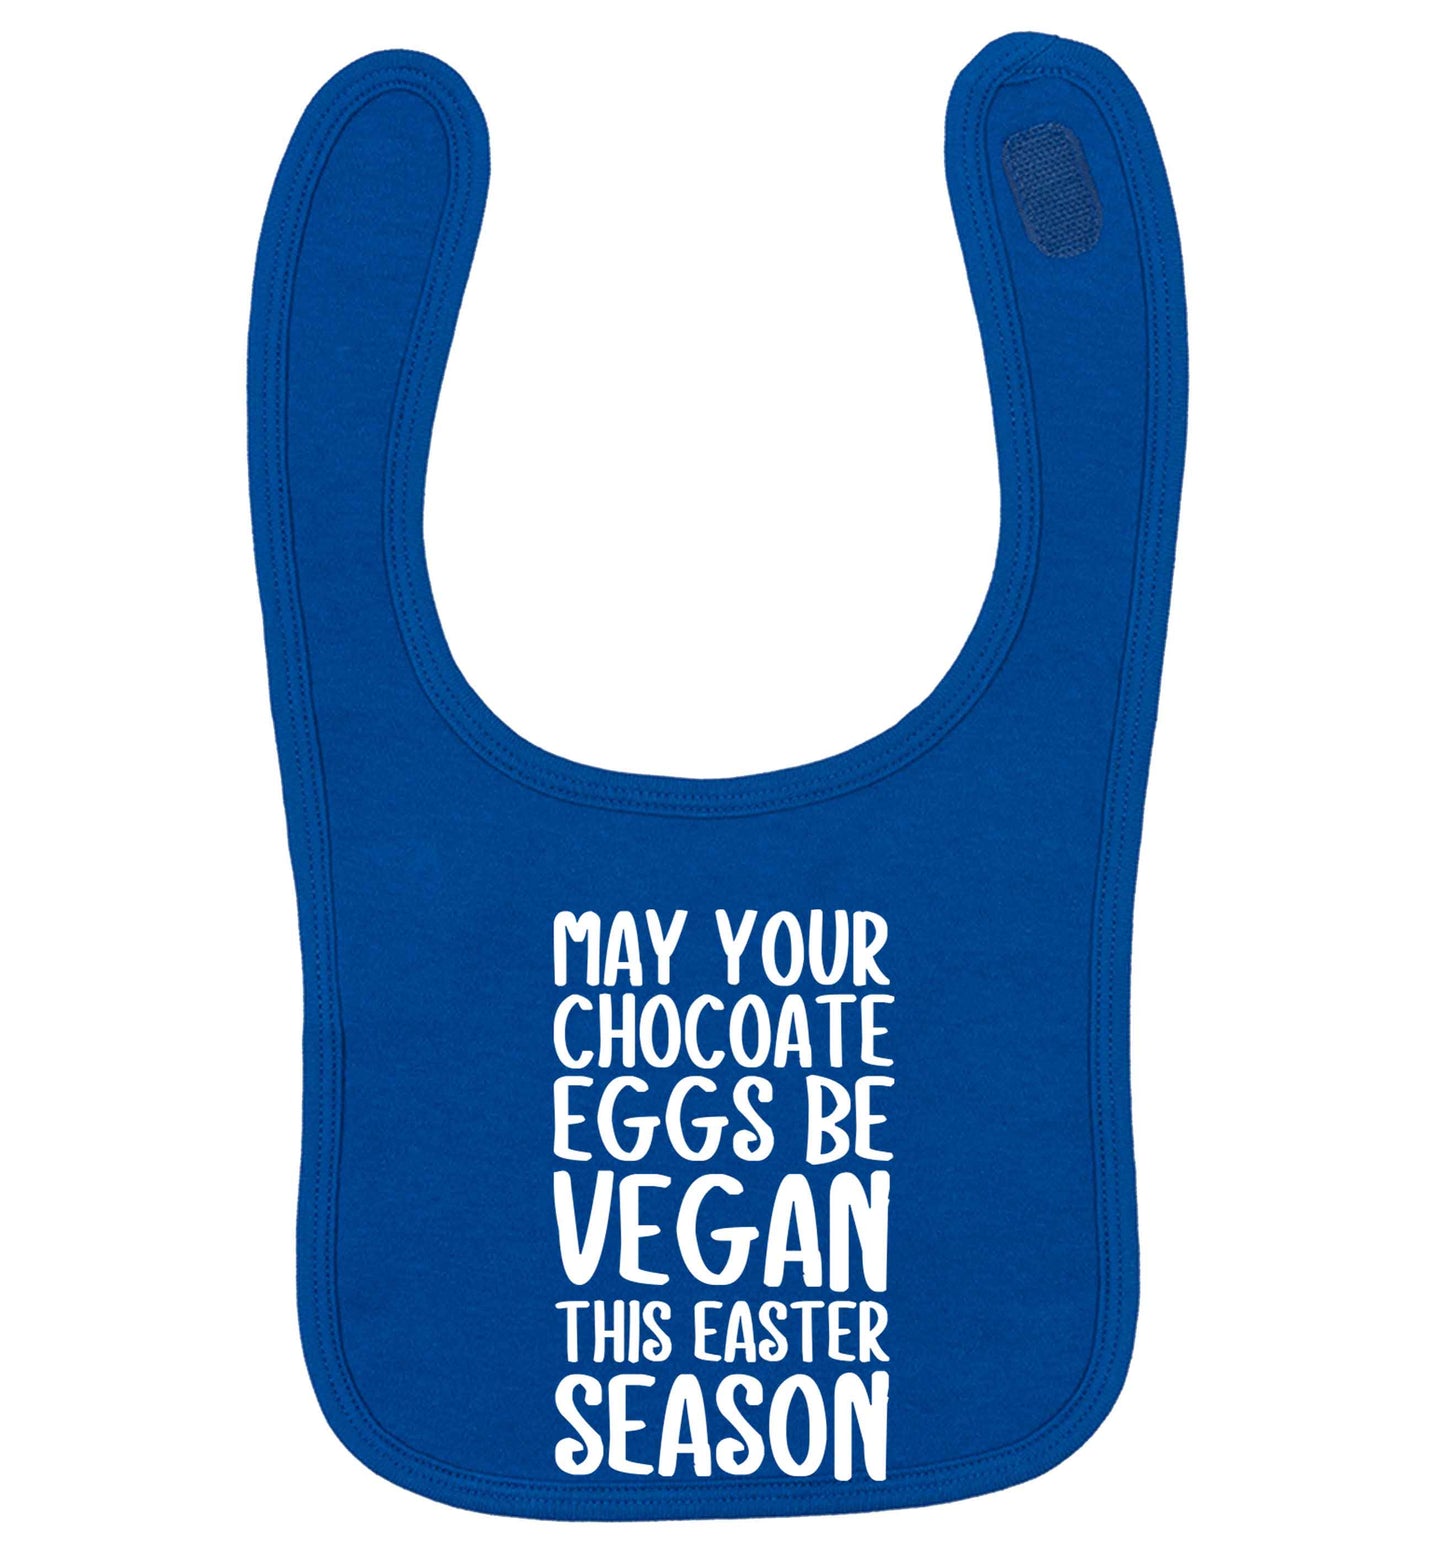 Easter bunny approved! Vegans will love this easter themed royal blue baby bib